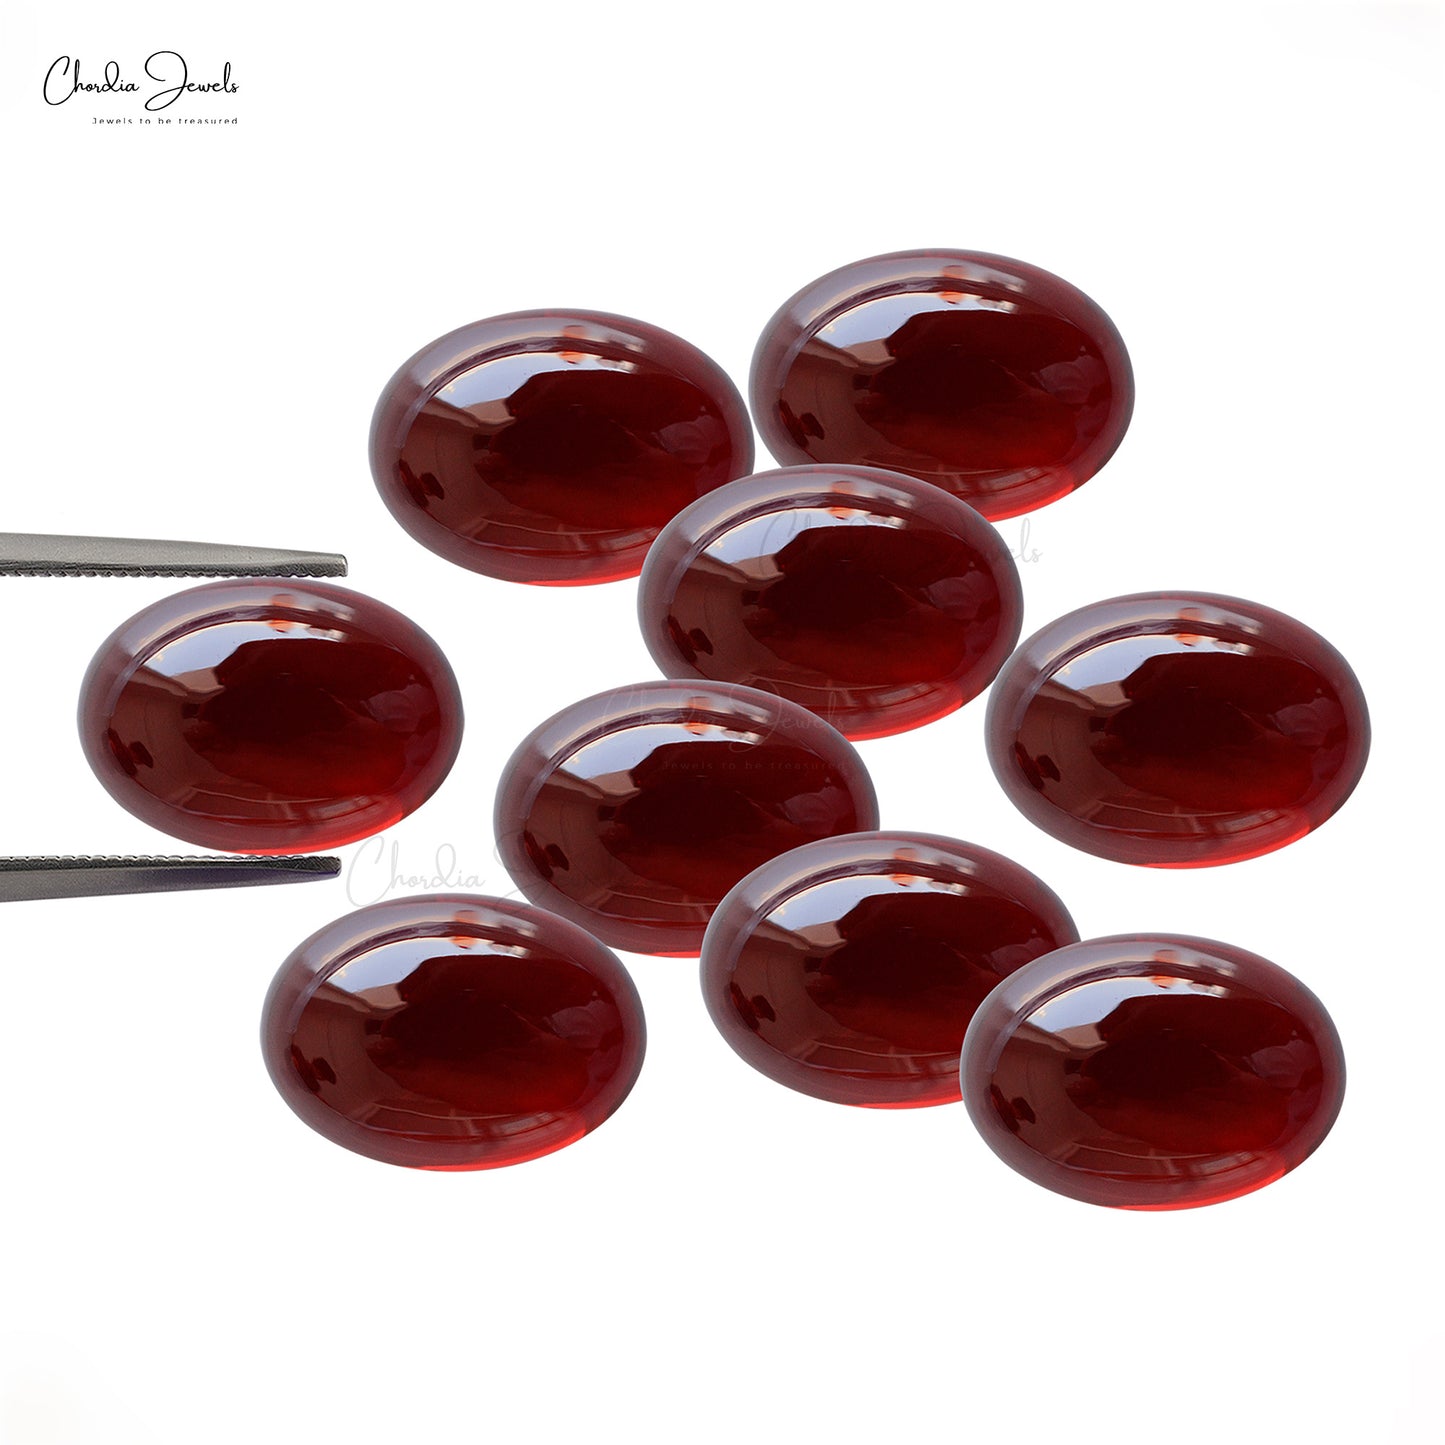 Mozambique Garnet Oval Cabochon 4X6MM High Quality Gemstone Wholesaler from India, 1 Piece